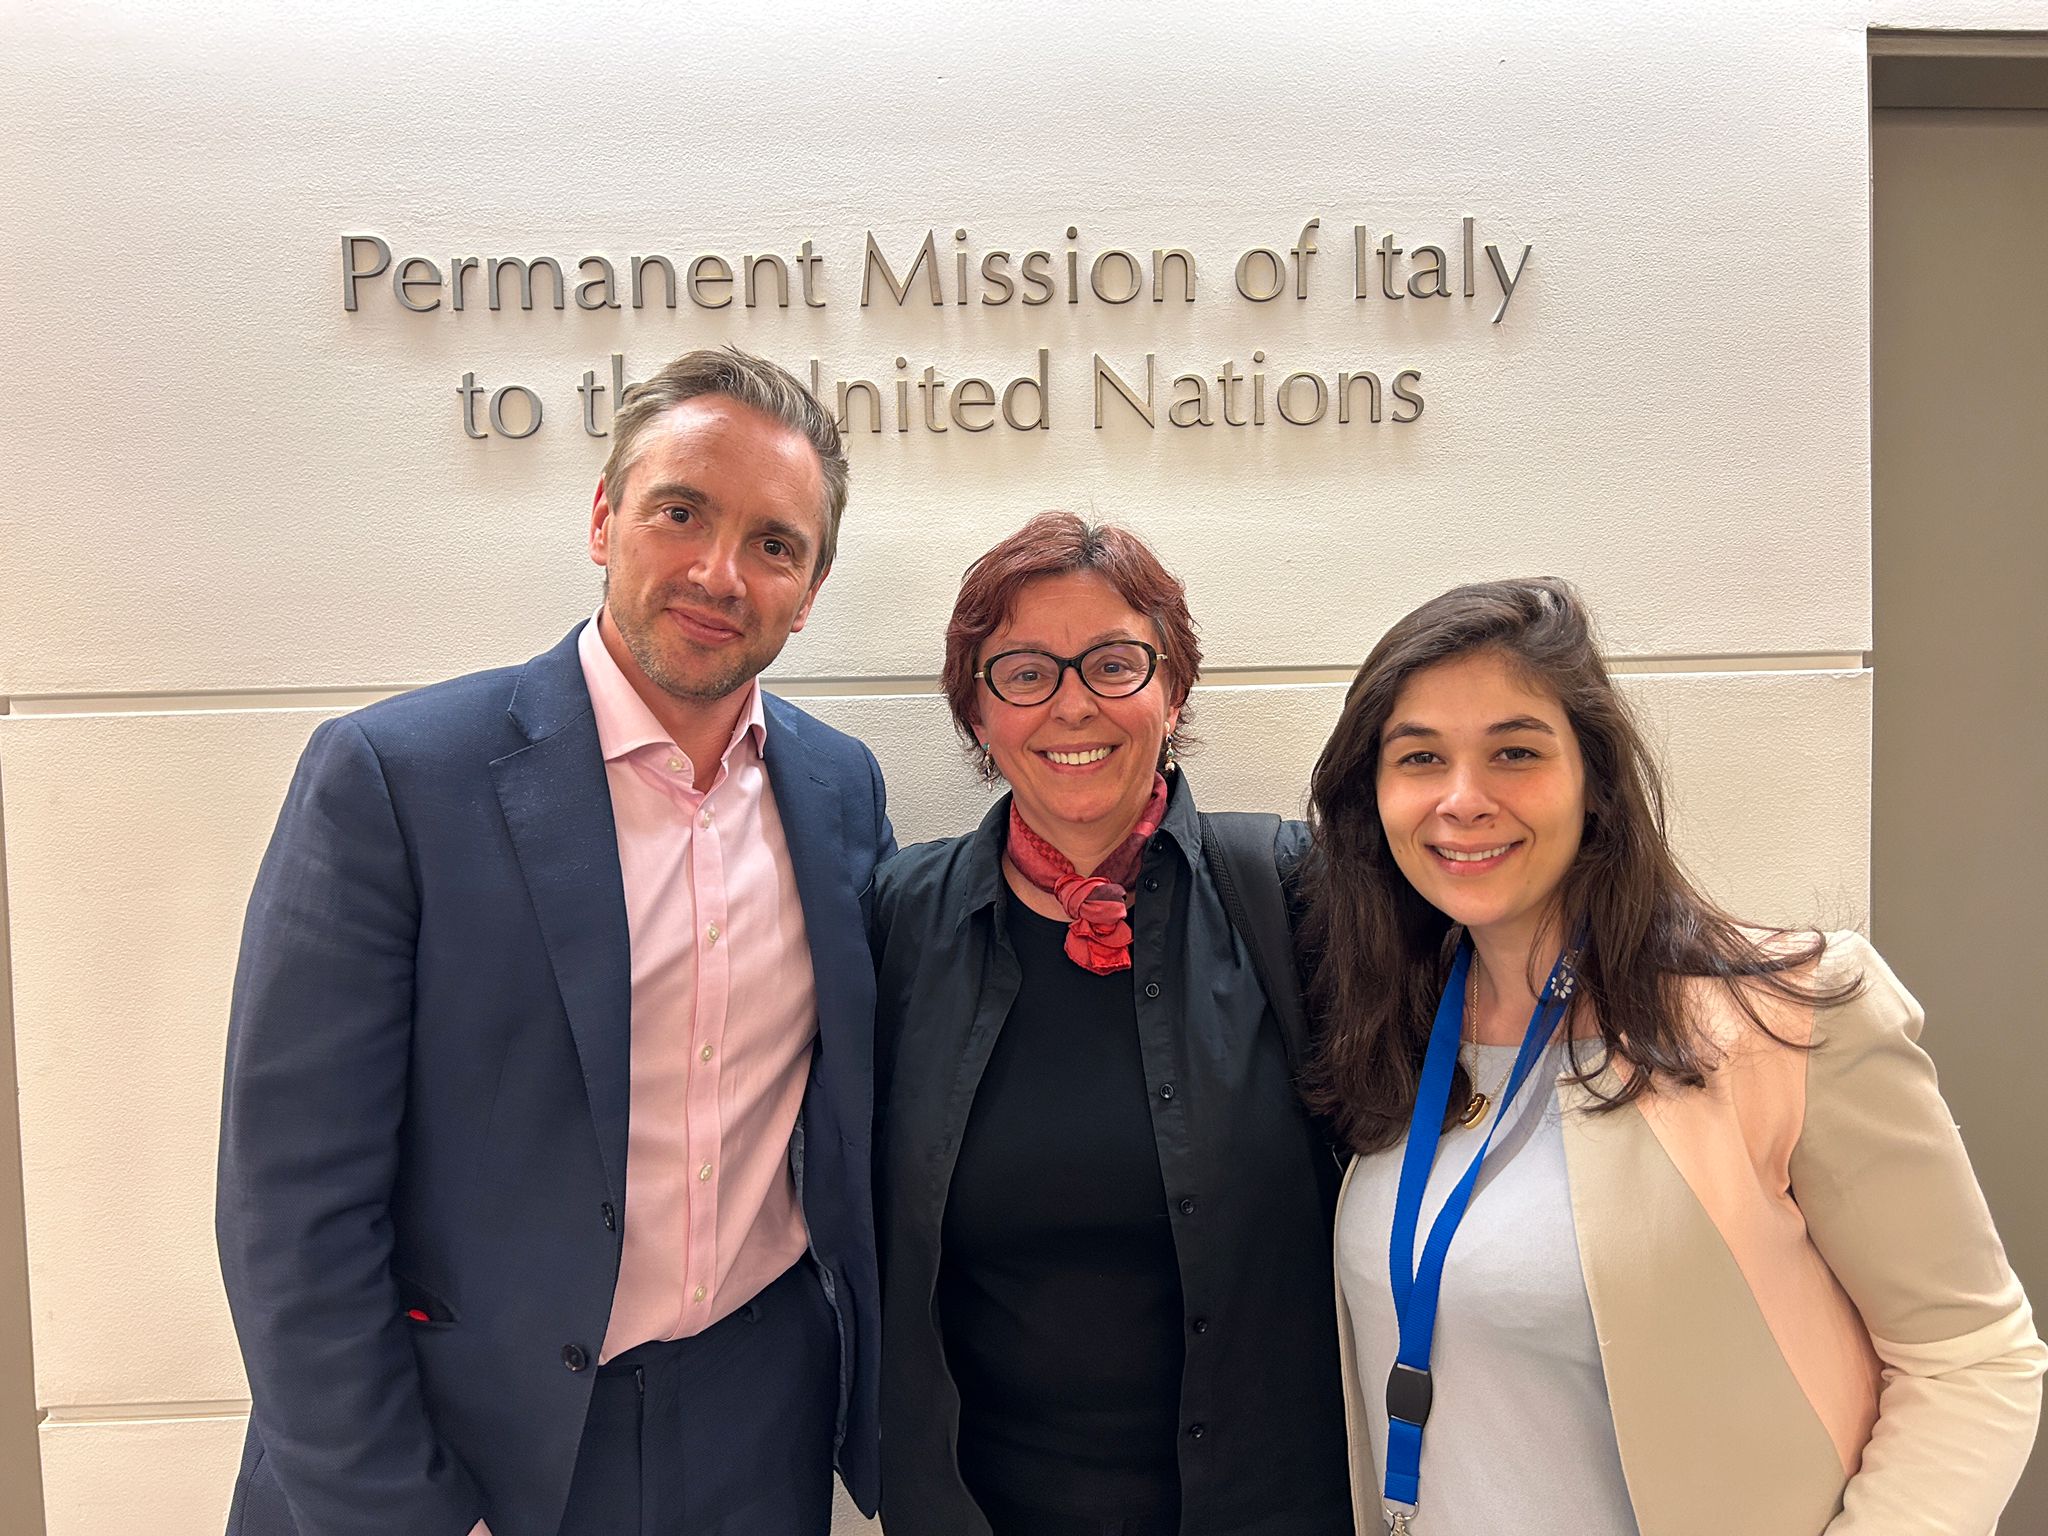 Two women and a men pose in front of a sign that reads "Permanent Mission of Italy to the United Nations"